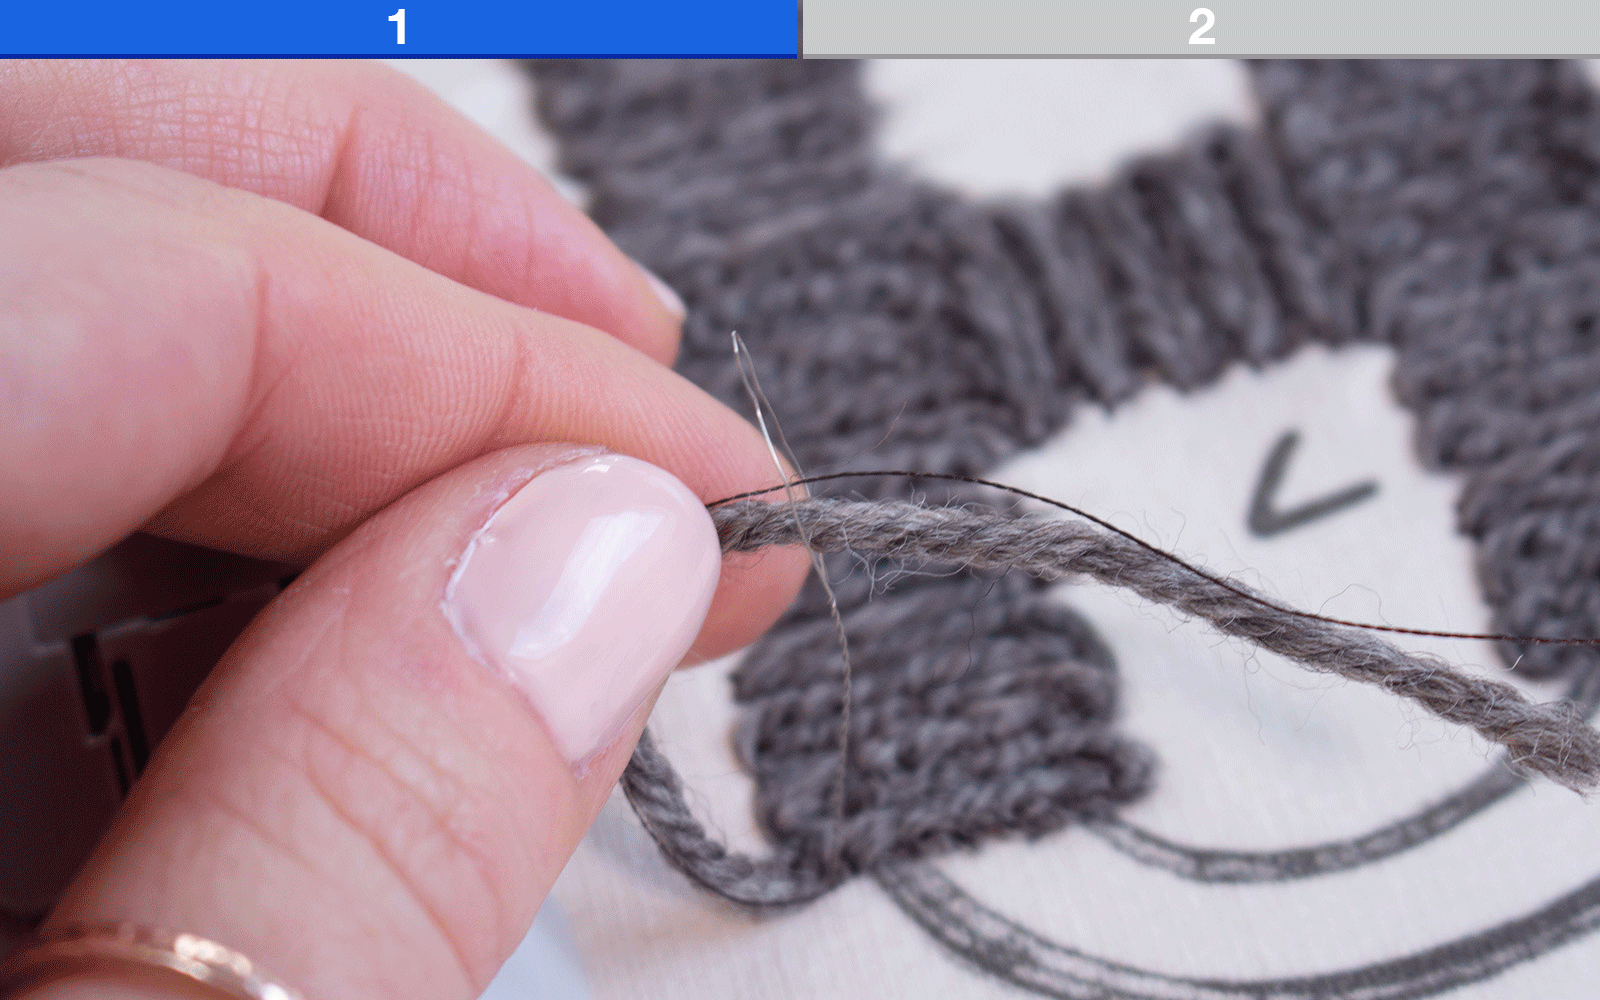 Yarn threaded into needle and interfacing on back of embroidery